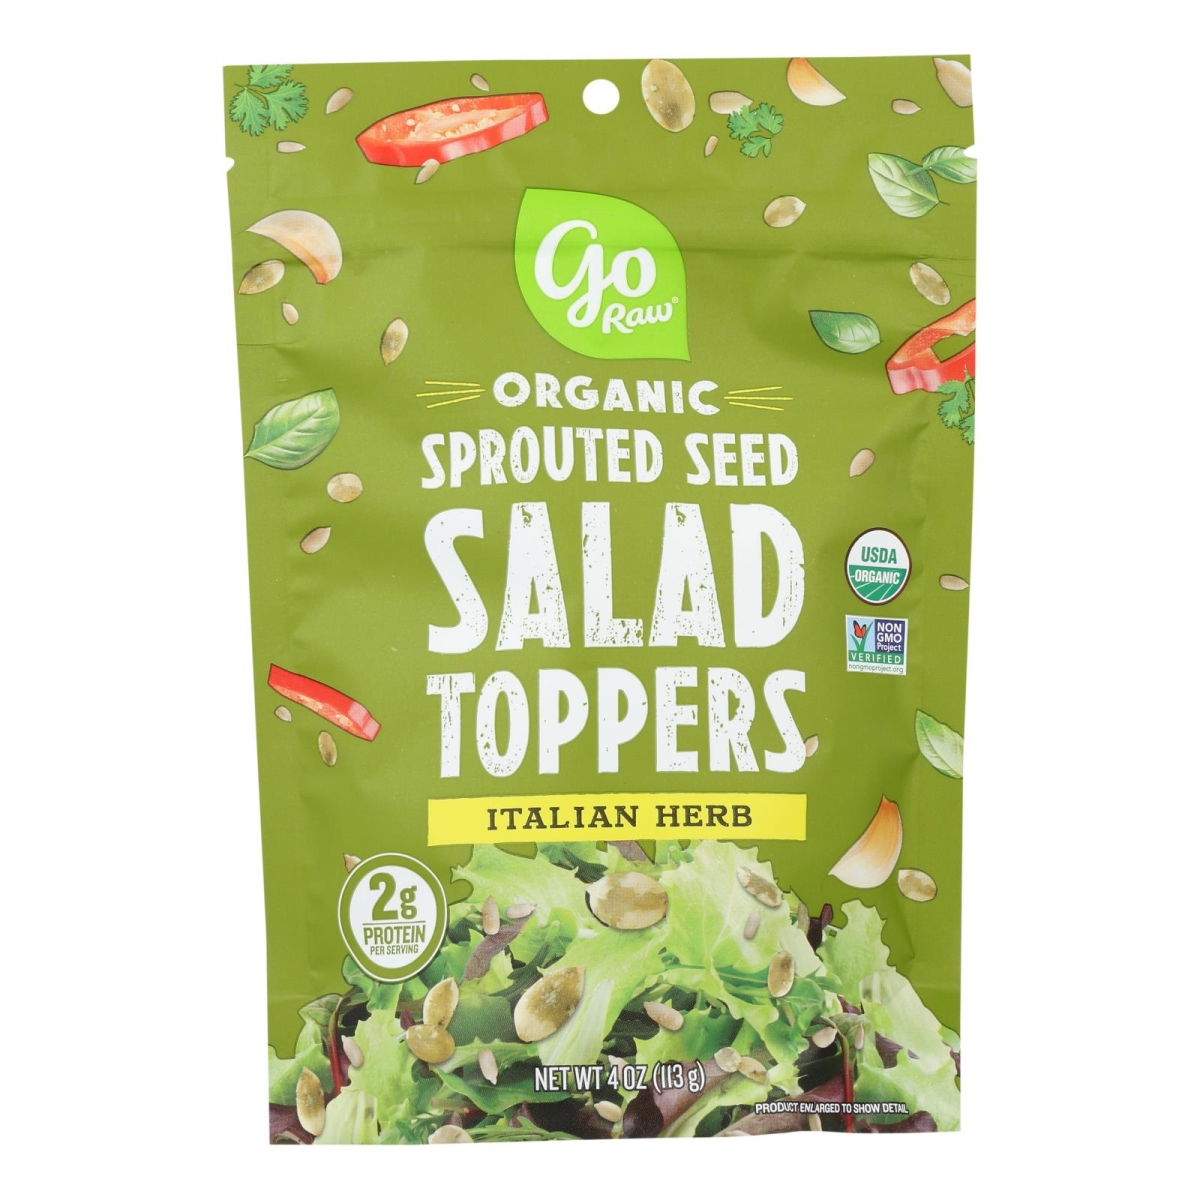 Picture of Go Raw HG2388197 4 oz Sald Tppper Italian Herbal Sprouted Seed Snacks - Case of 10